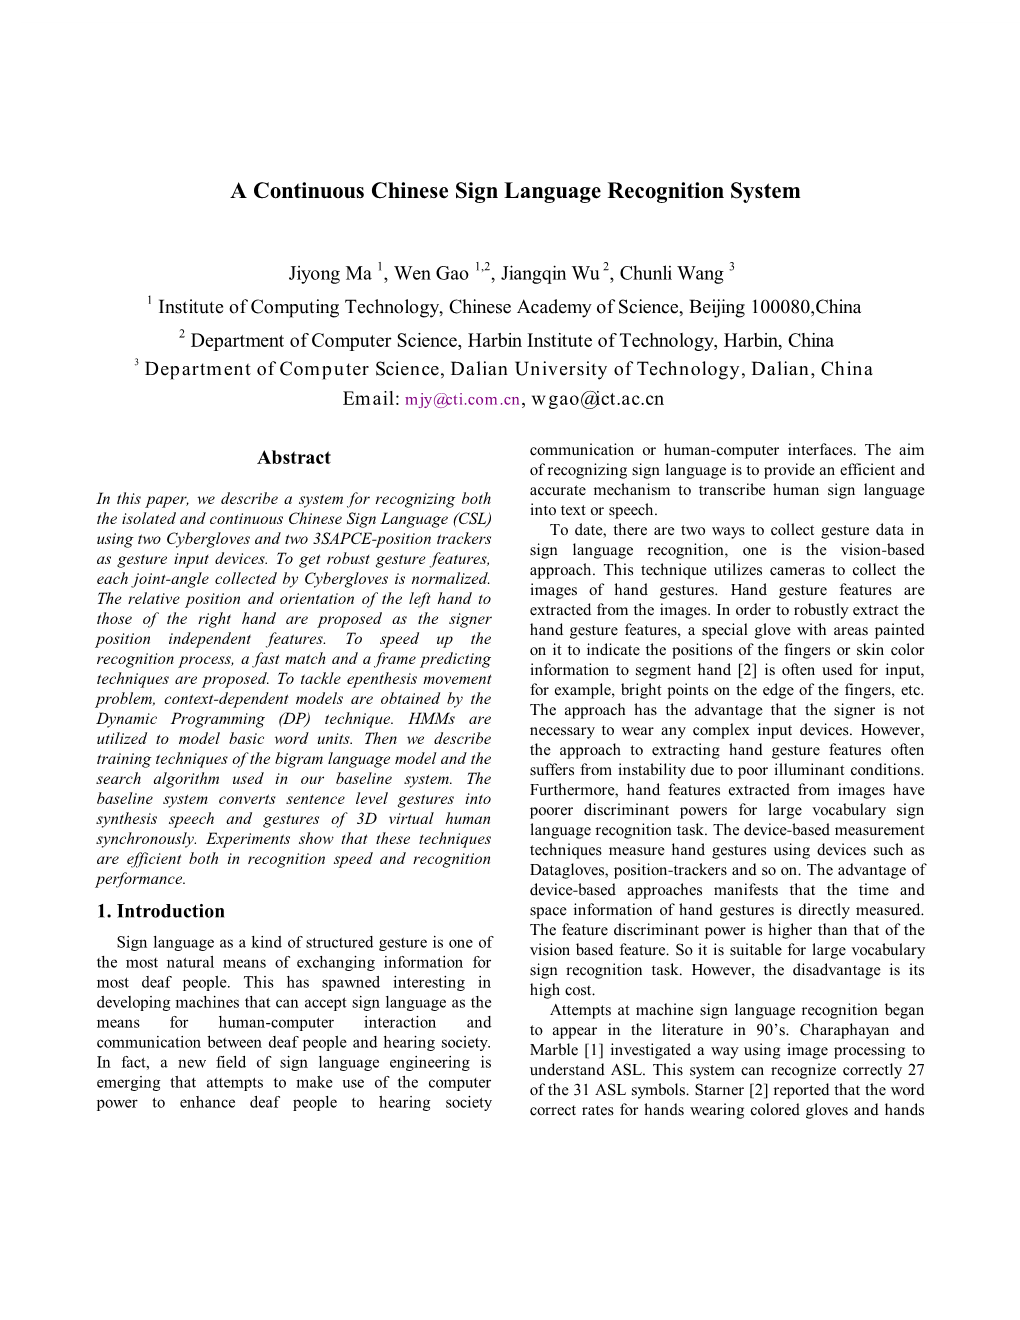 A Continuous Chinese Sign Language Recognition System